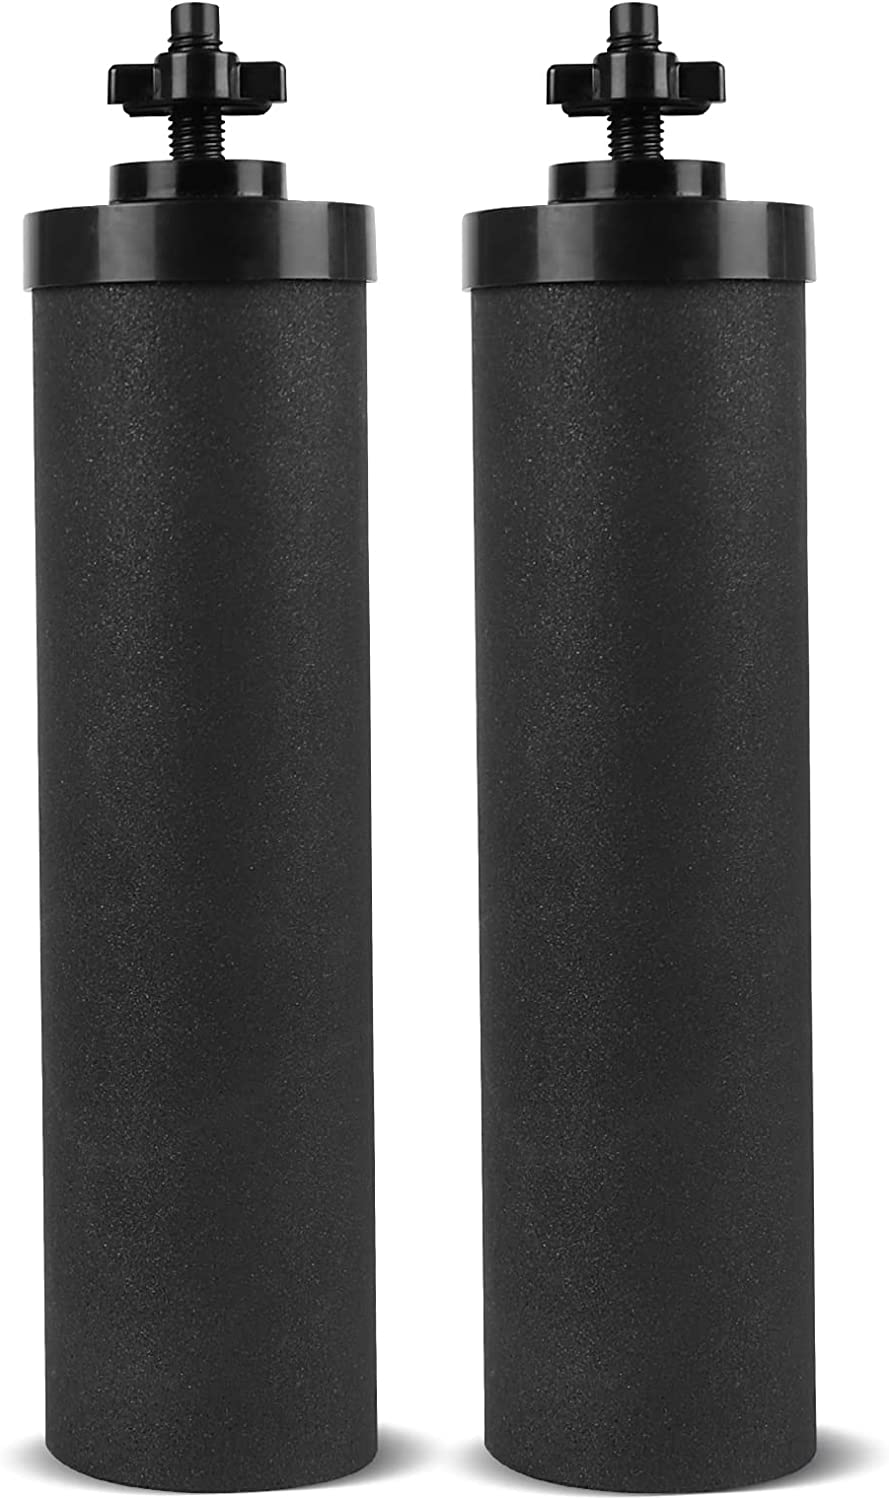 SUPER.BDACC Water Filter Replacement, Gravity Controlled Flow, Carbon Block Replacement for BB9-2 Berkey Black System, Compatible with Stainless Steel Countertop Purification, Pack of 2